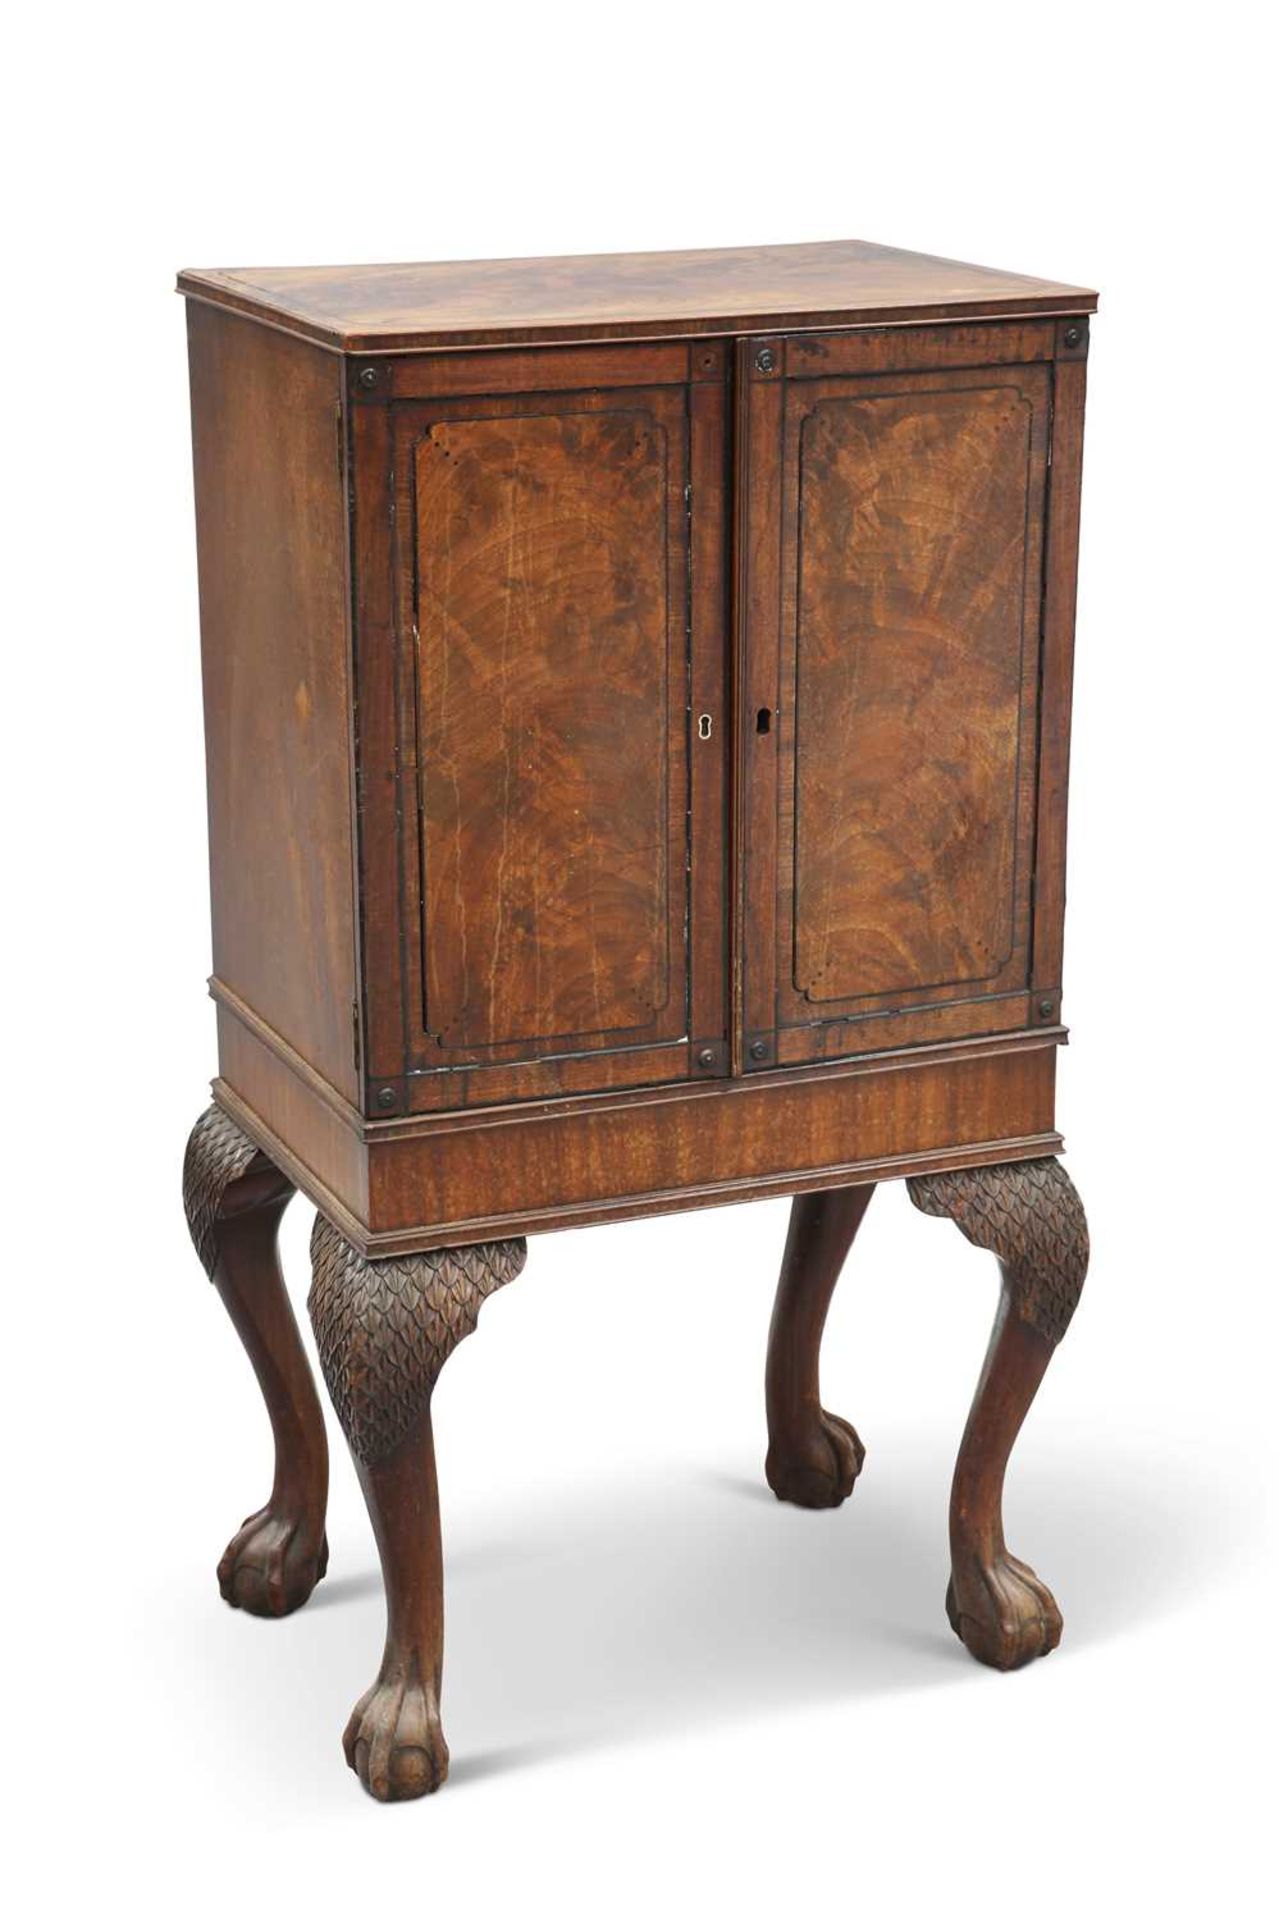 AN EBONY-STRUNG MAHOGANY COLLECTOR'S CABINET, IN IRISH STYLE, 18TH CENTURY AND LATER